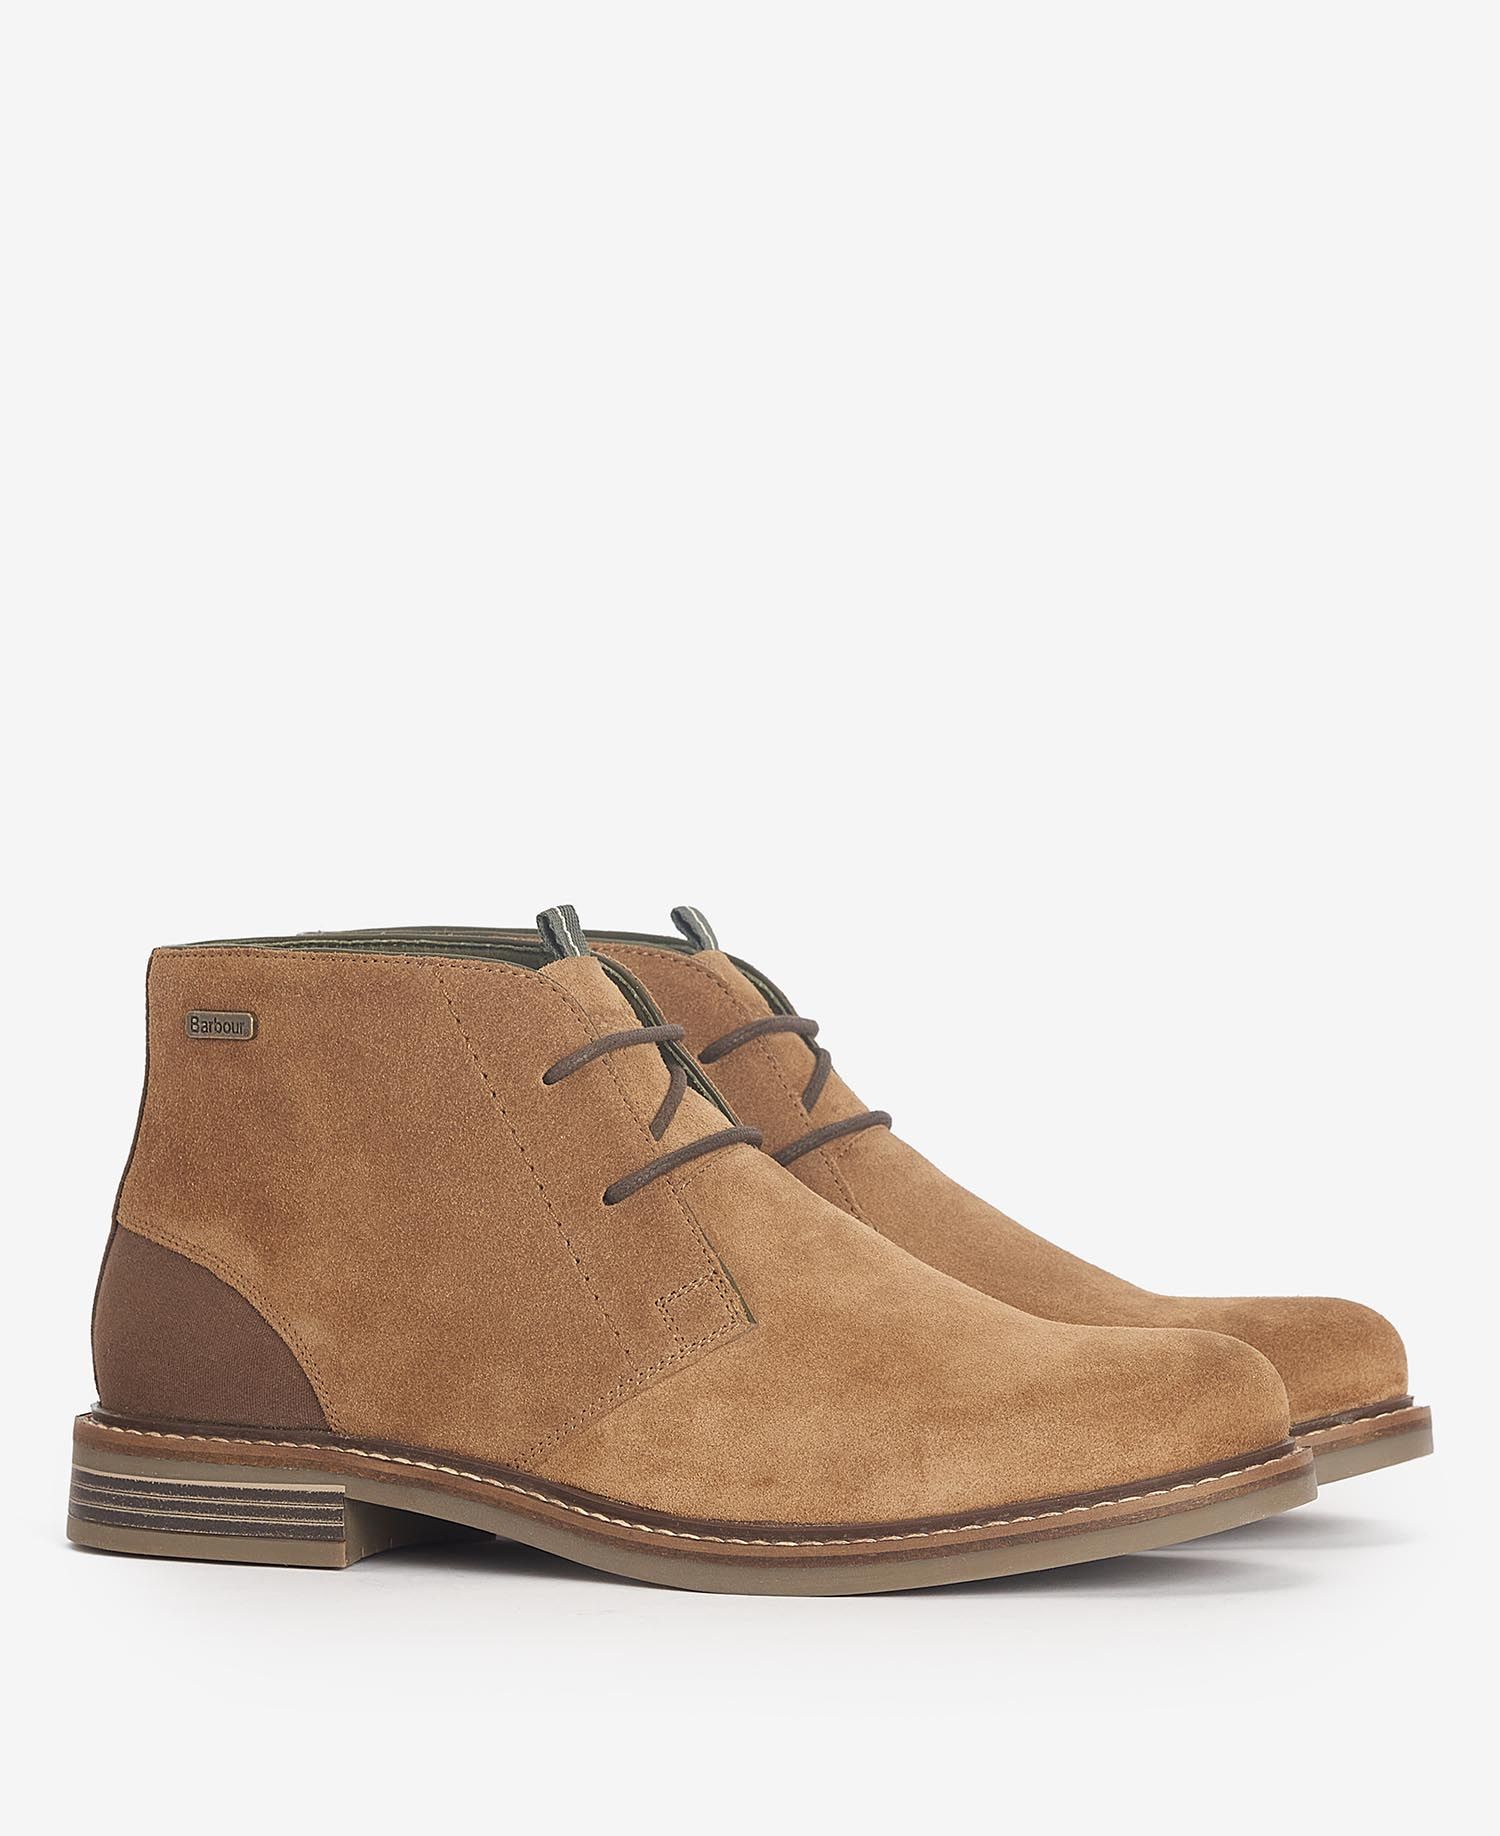 Men's Readhead Boots - Fawn Suede